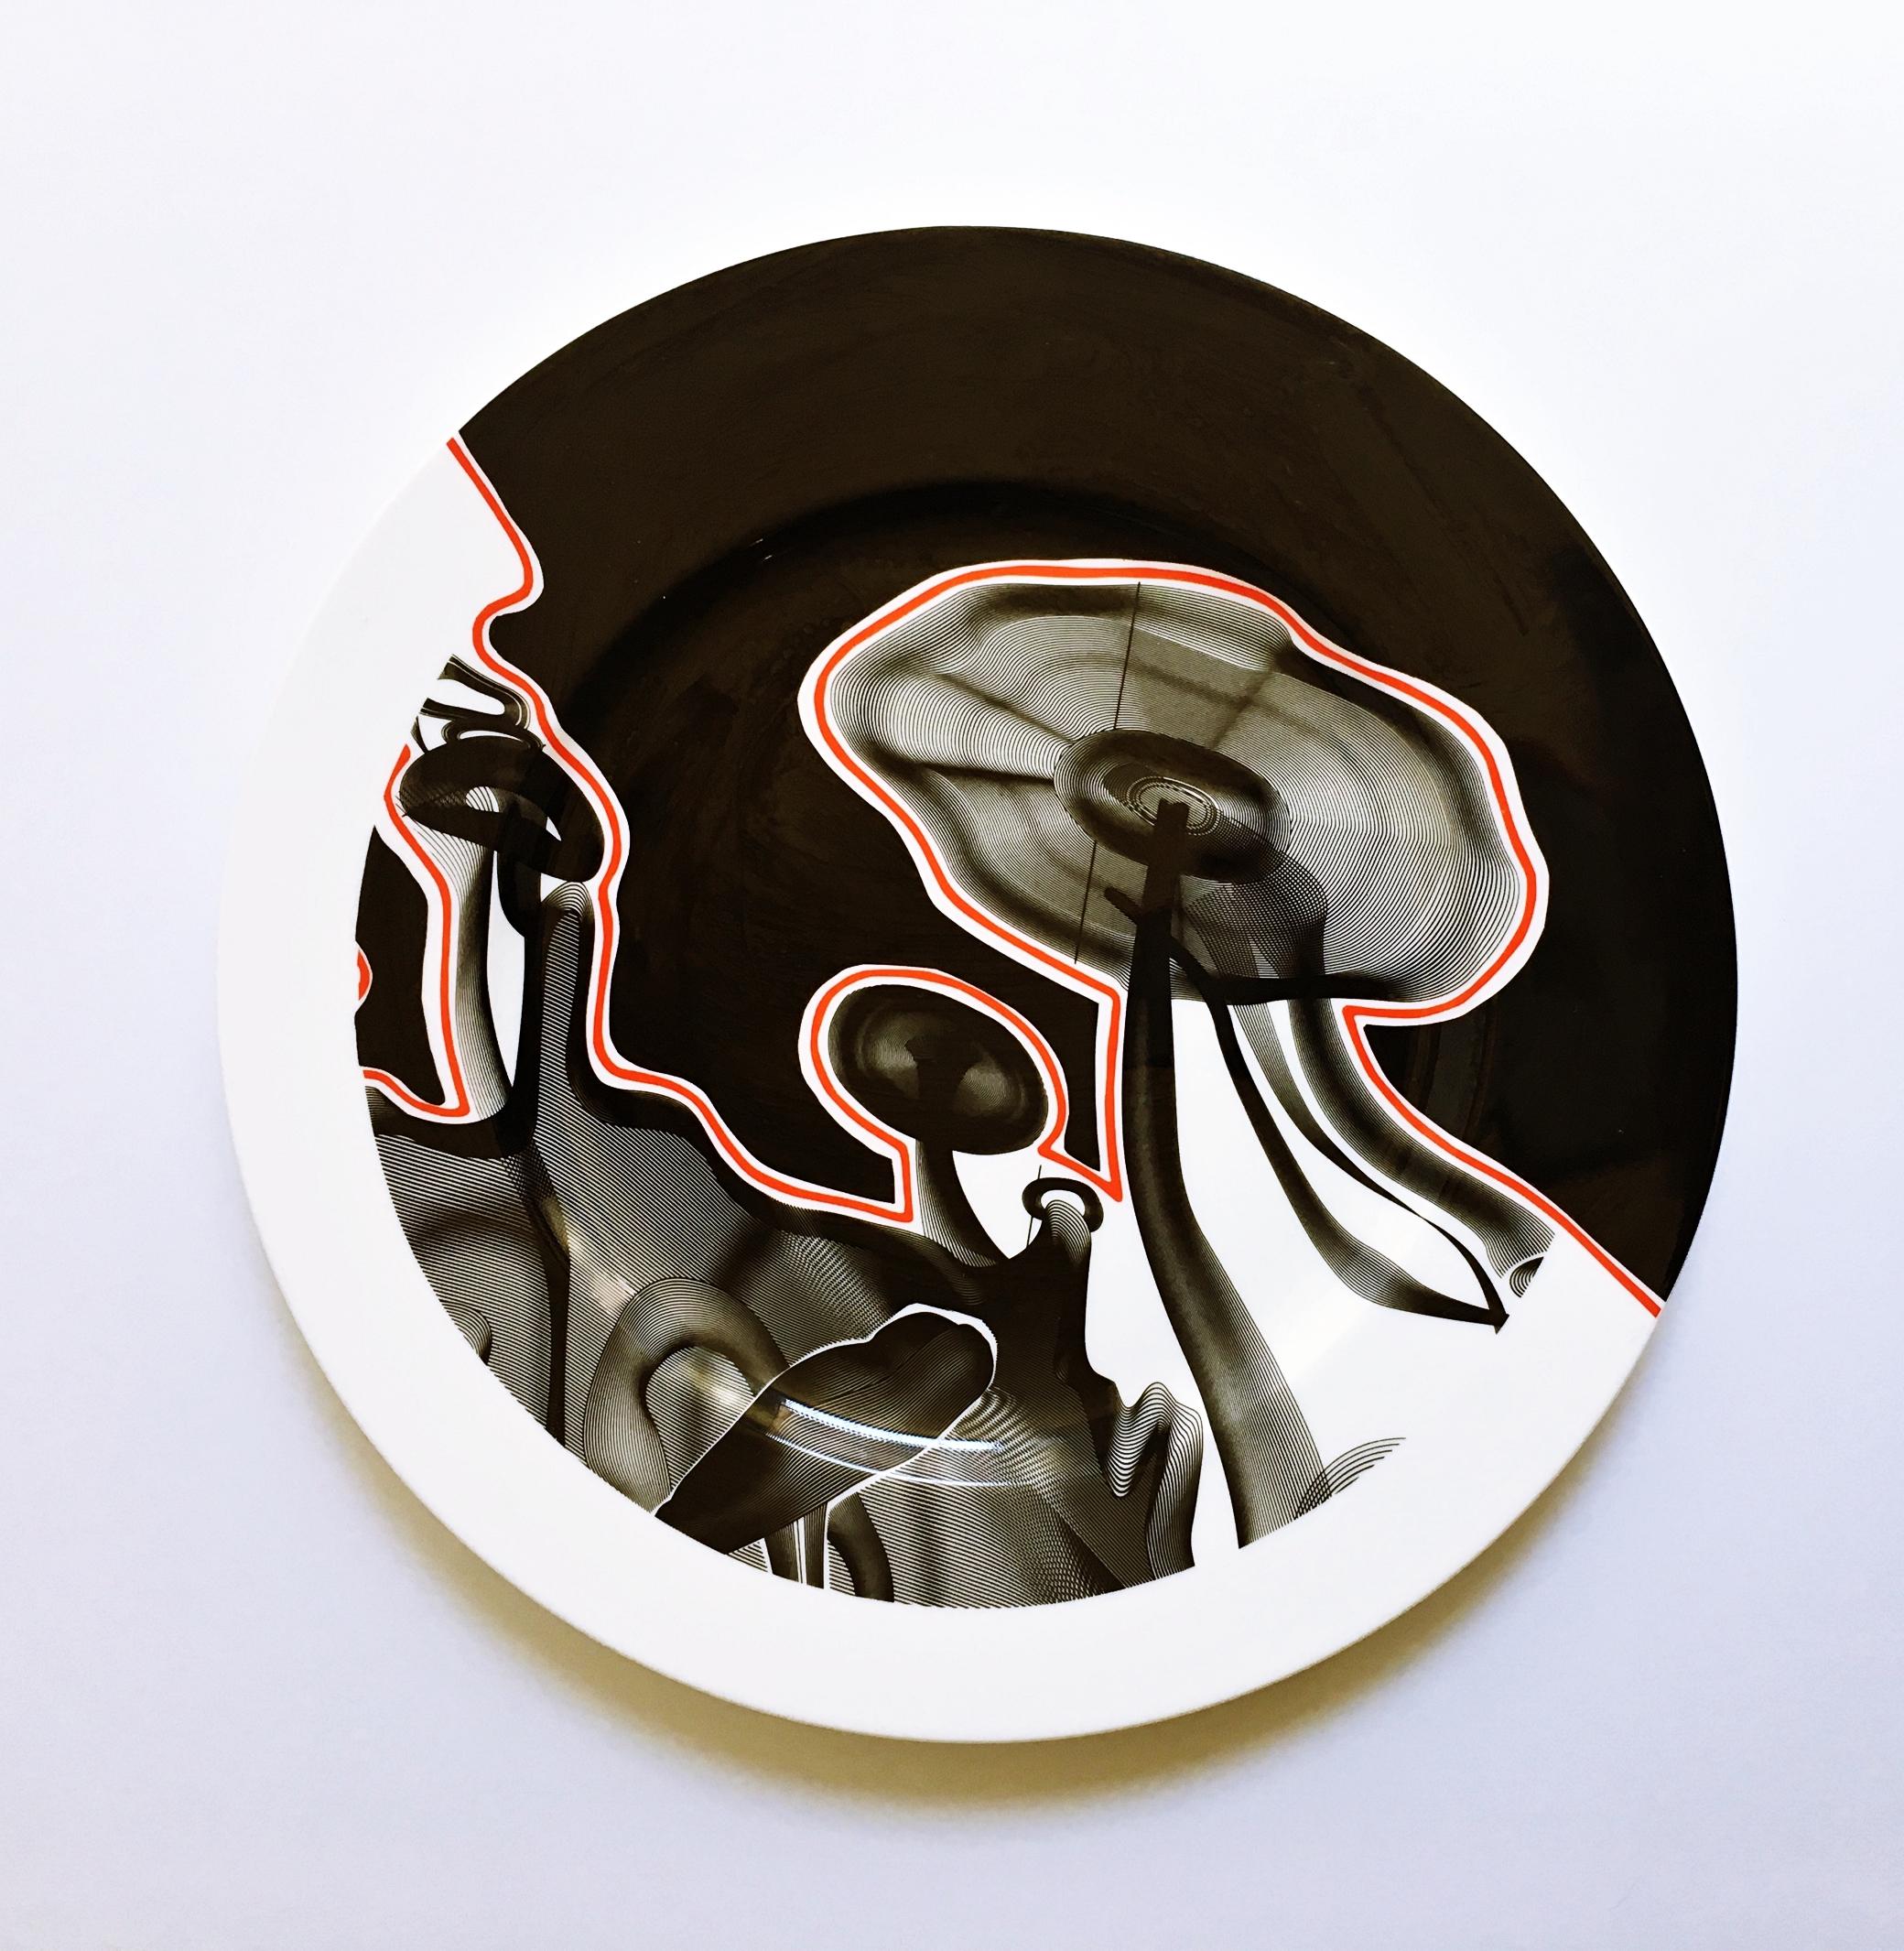 Frank Stella Abstract Print - Vortex Engraving #4 Charger Plate - Limited Edition numbered and plate signed